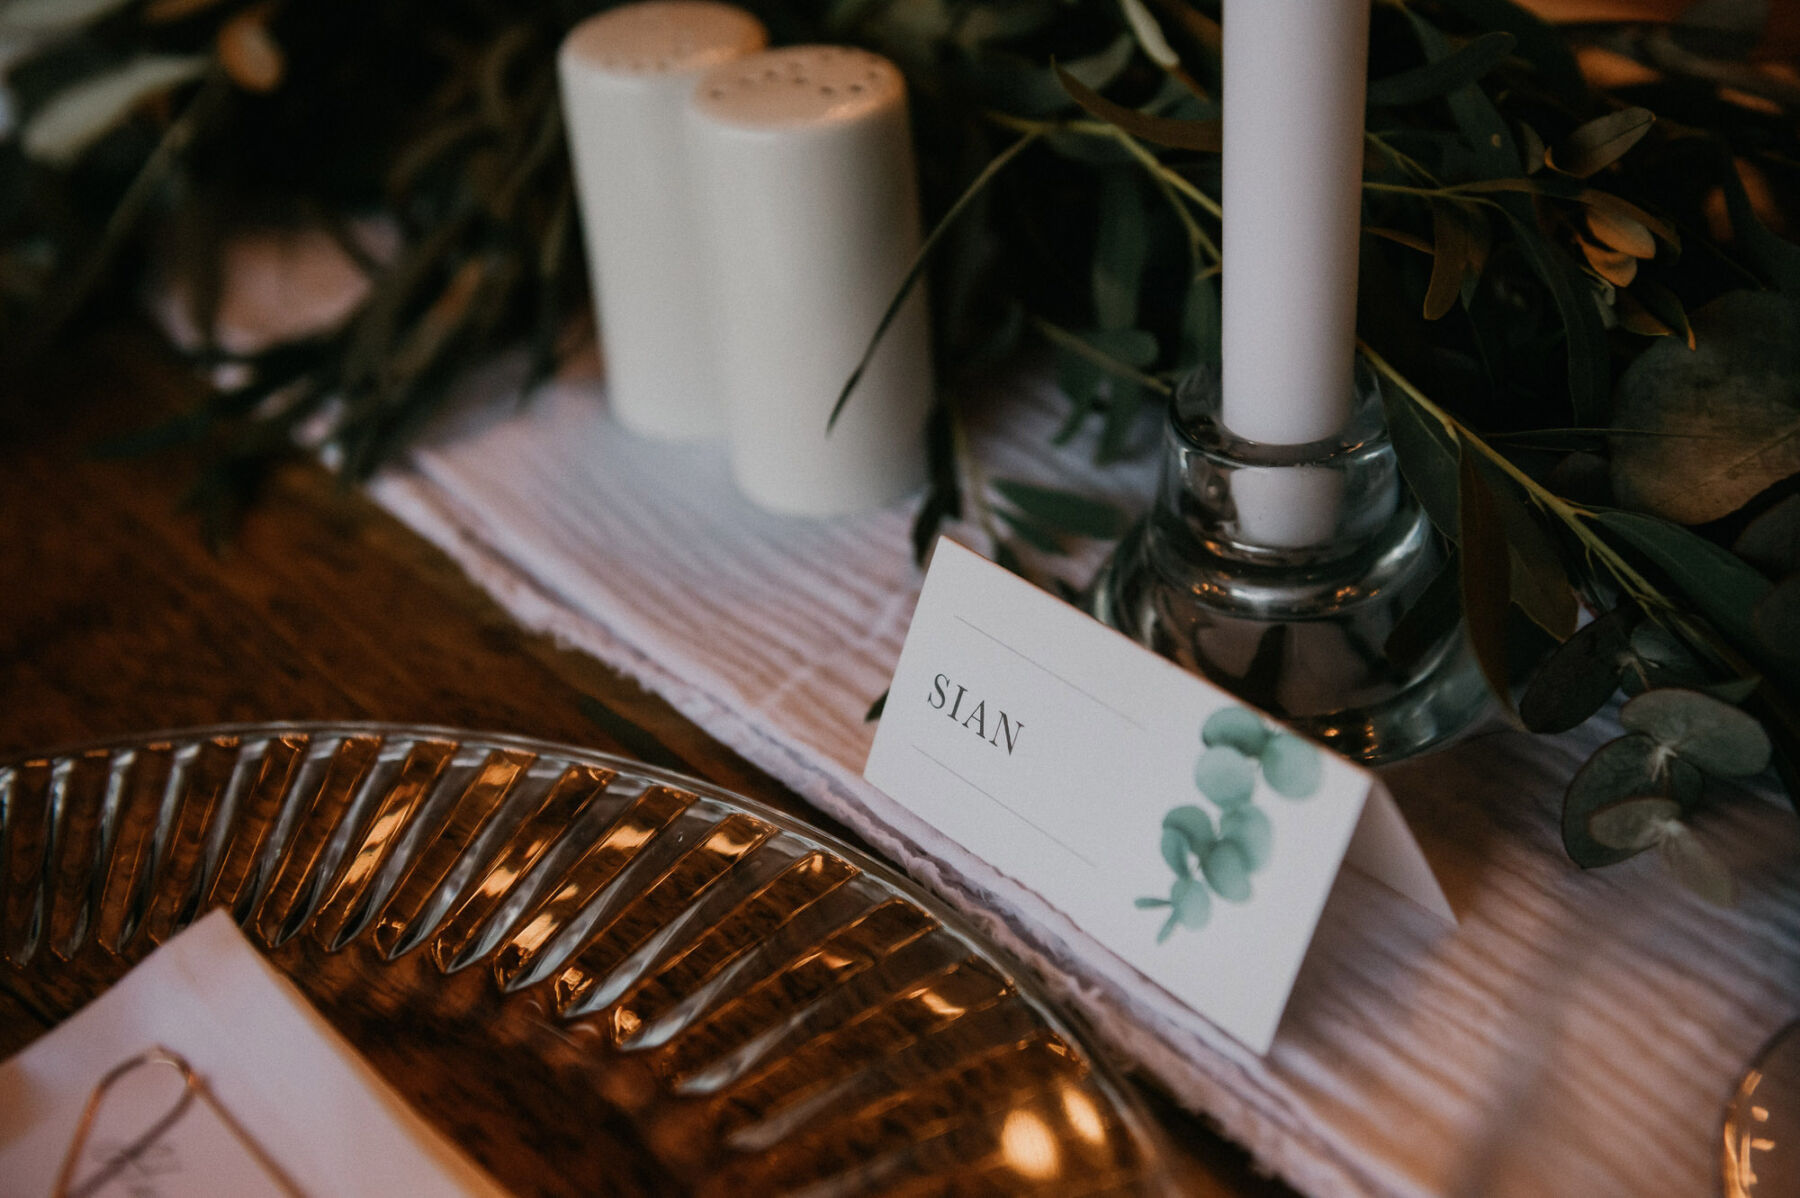 Simple + elegant watercolour place name cards at wedding reception. Jessica Grace Photography.